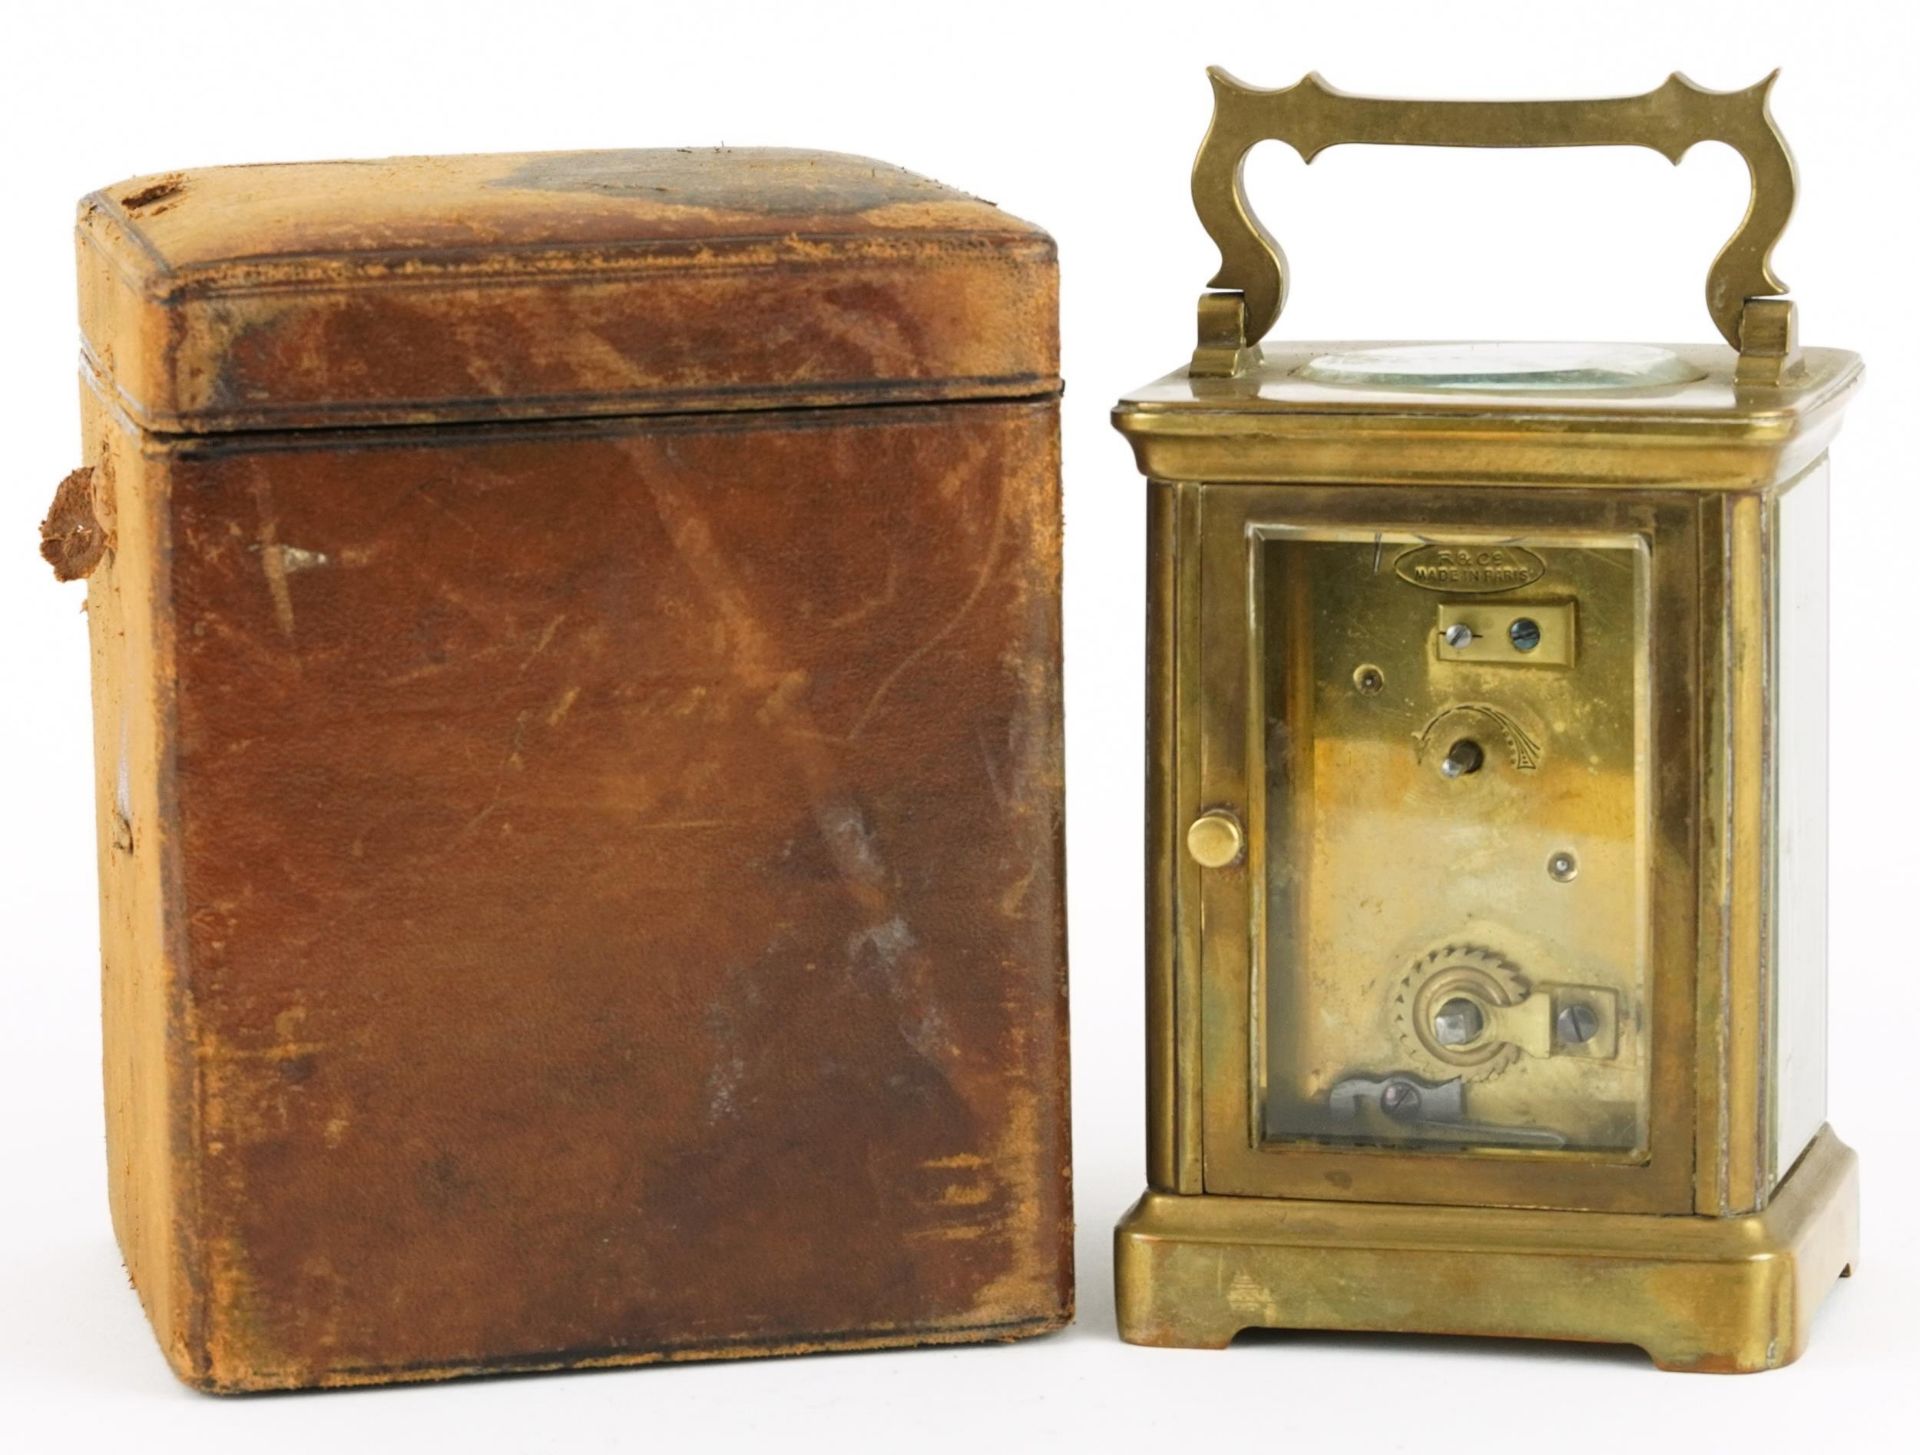 Richard & Co, 19th century French brass cased carriage clock with velvet lined leather travel case - Image 3 of 5